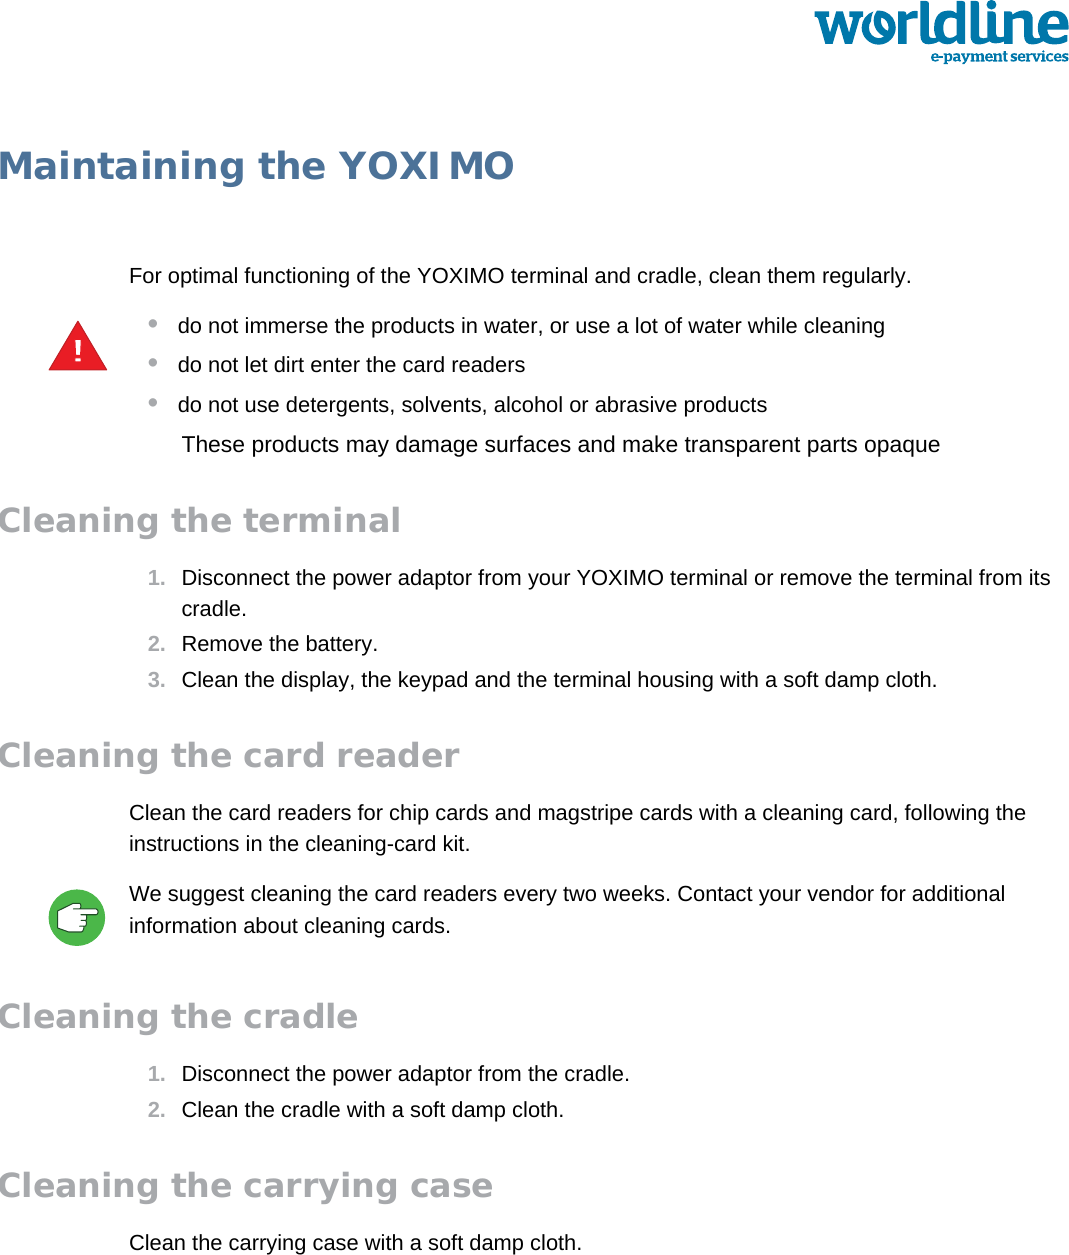 public 35om_yxm_maintenance.fm document release 1.1 last updated 30/9/15Maintaining the YOXIMOFor optimal functioning of the YOXIMO terminal and cradle, clean them regularly.•do not immerse the products in water, or use a lot of water while cleaning•do not let dirt enter the card readers•do not use detergents, solvents, alcohol or abrasive productsThese products may damage surfaces and make transparent parts opaqueCleaning the terminal1. Disconnect the power adaptor from your YOXIMO terminal or remove the terminal from its cradle.2. Remove the battery.3. Clean the display, the keypad and the terminal housing with a soft damp cloth.Cleaning the card readerClean the card readers for chip cards and magstripe cards with a cleaning card, following the instructions in the cleaning-card kit. We suggest cleaning the card readers every two weeks. Contact your vendor for additional information about cleaning cards.Cleaning the cradle1. Disconnect the power adaptor from the cradle.2. Clean the cradle with a soft damp cloth.Cleaning the carrying caseClean the carrying case with a soft damp cloth.!